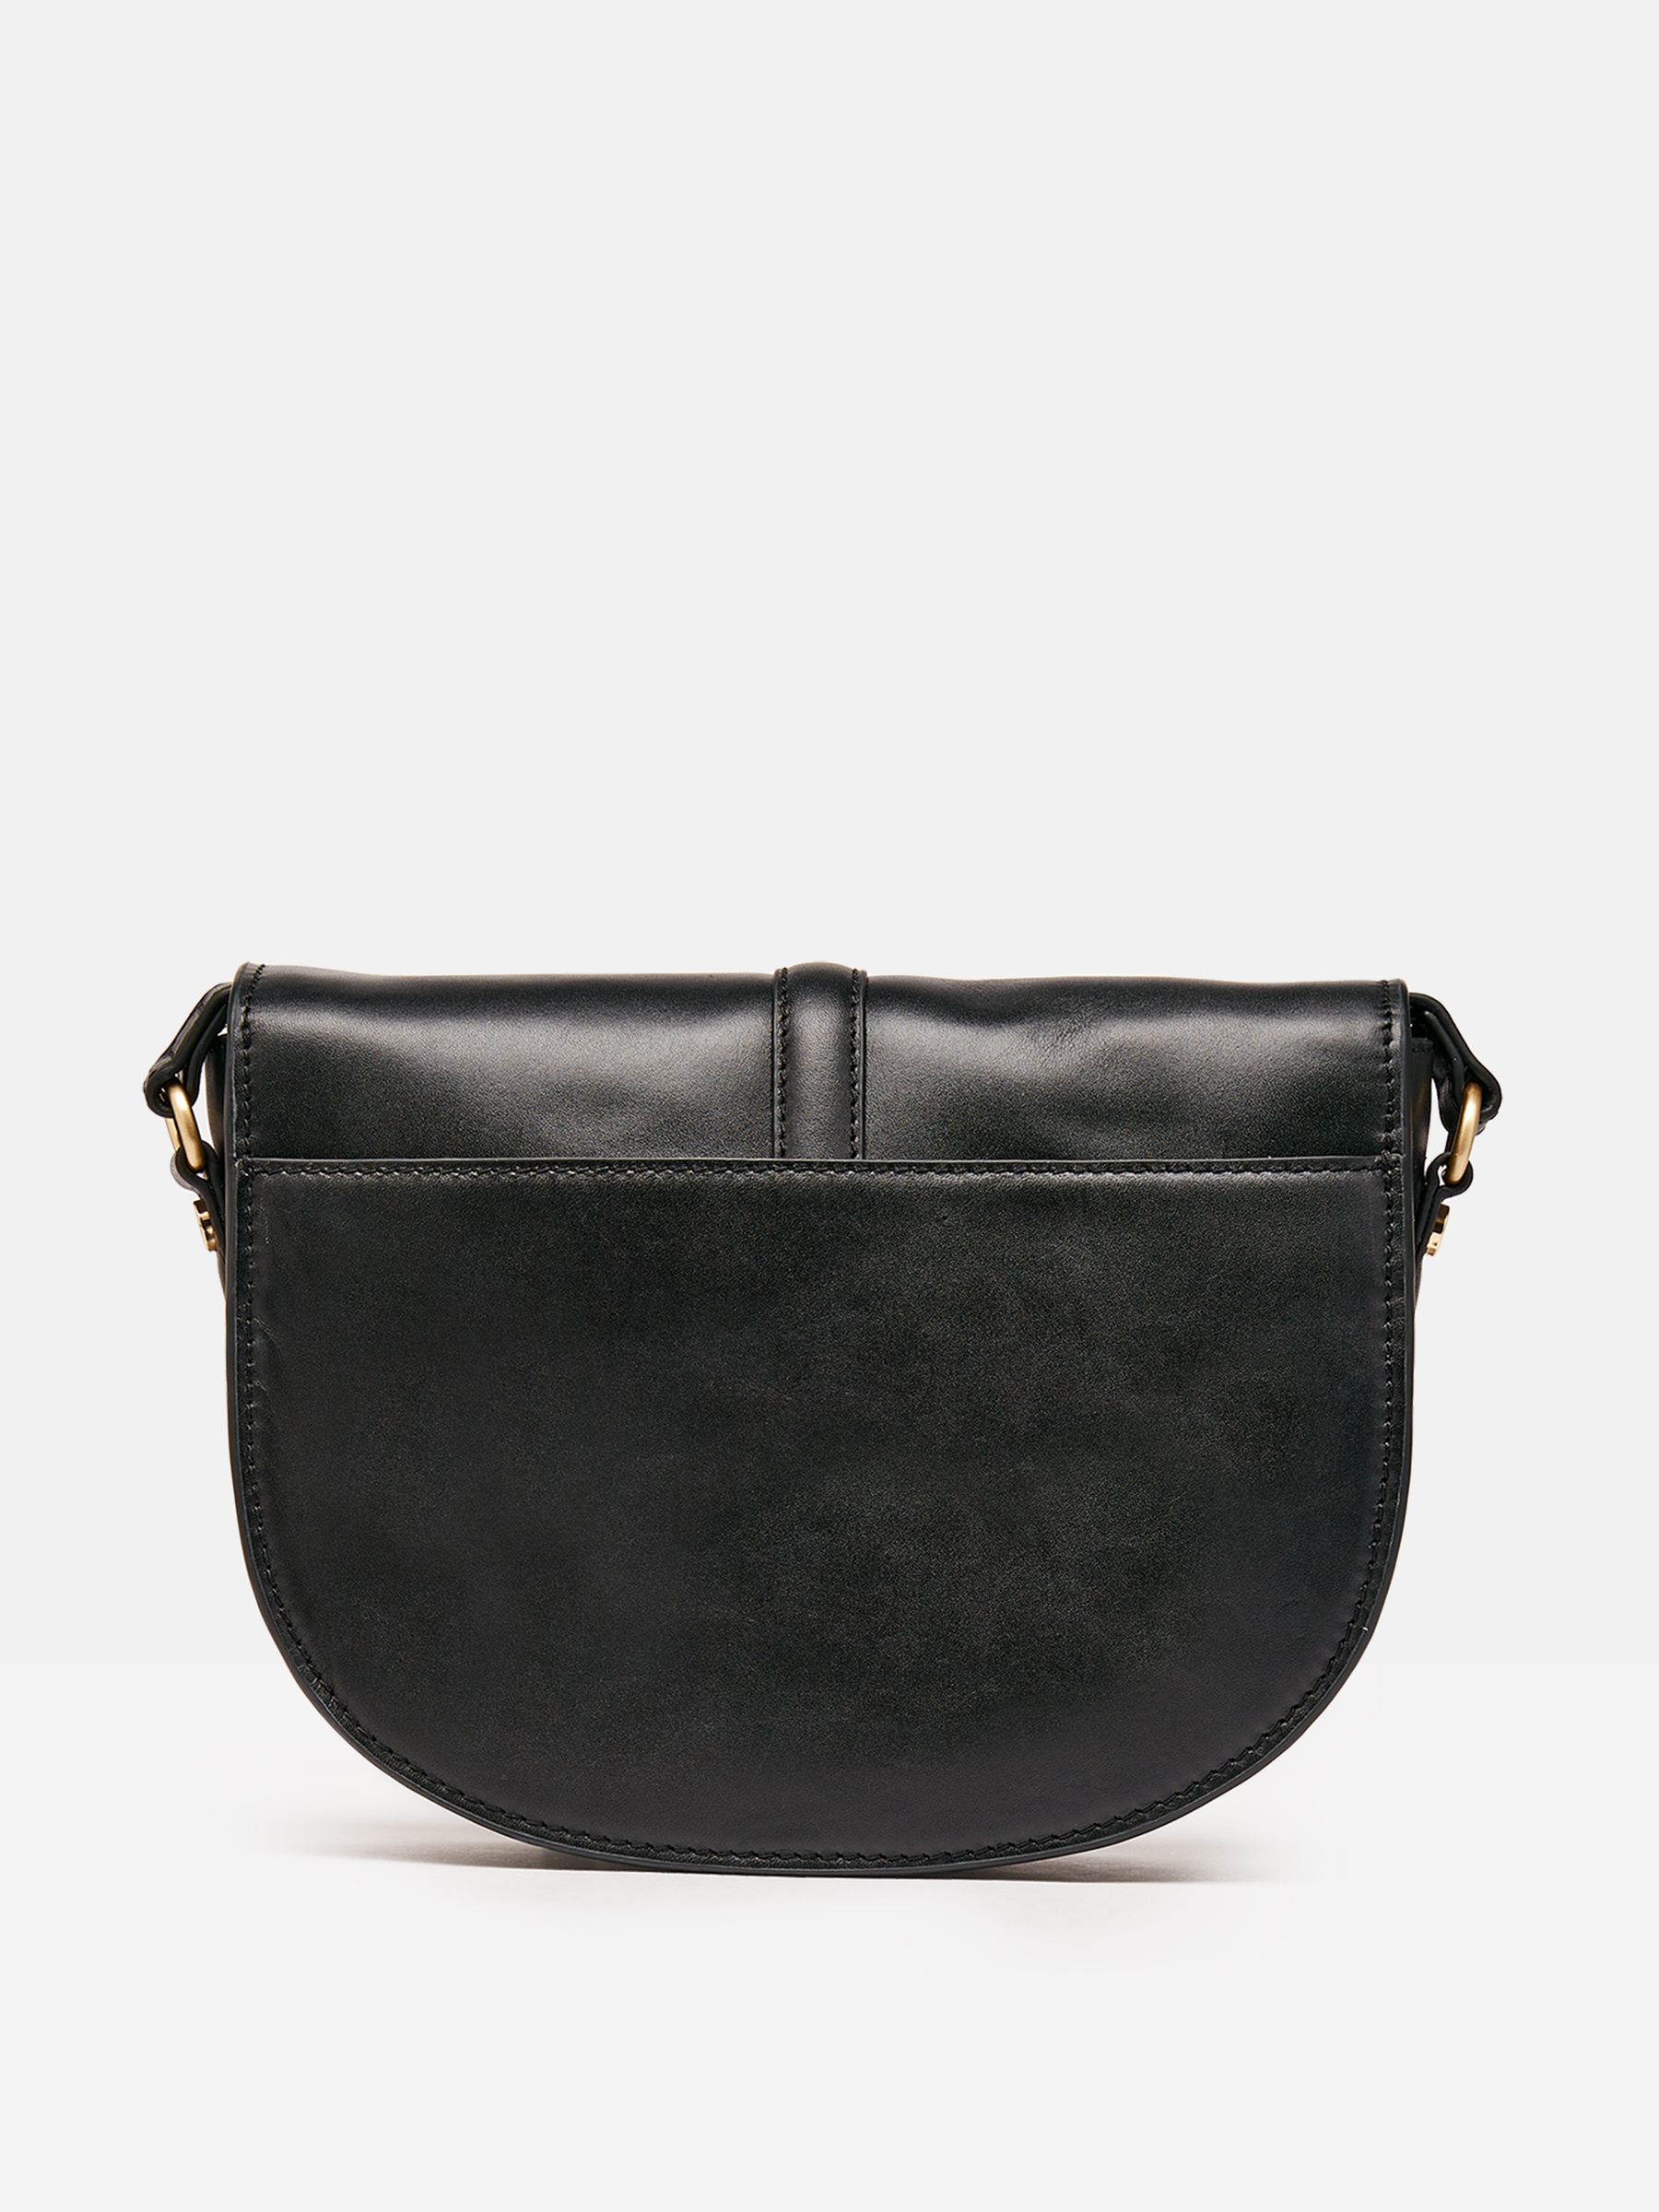 Buy Black Soft Leather Cross Body Bag from the Joules online shop